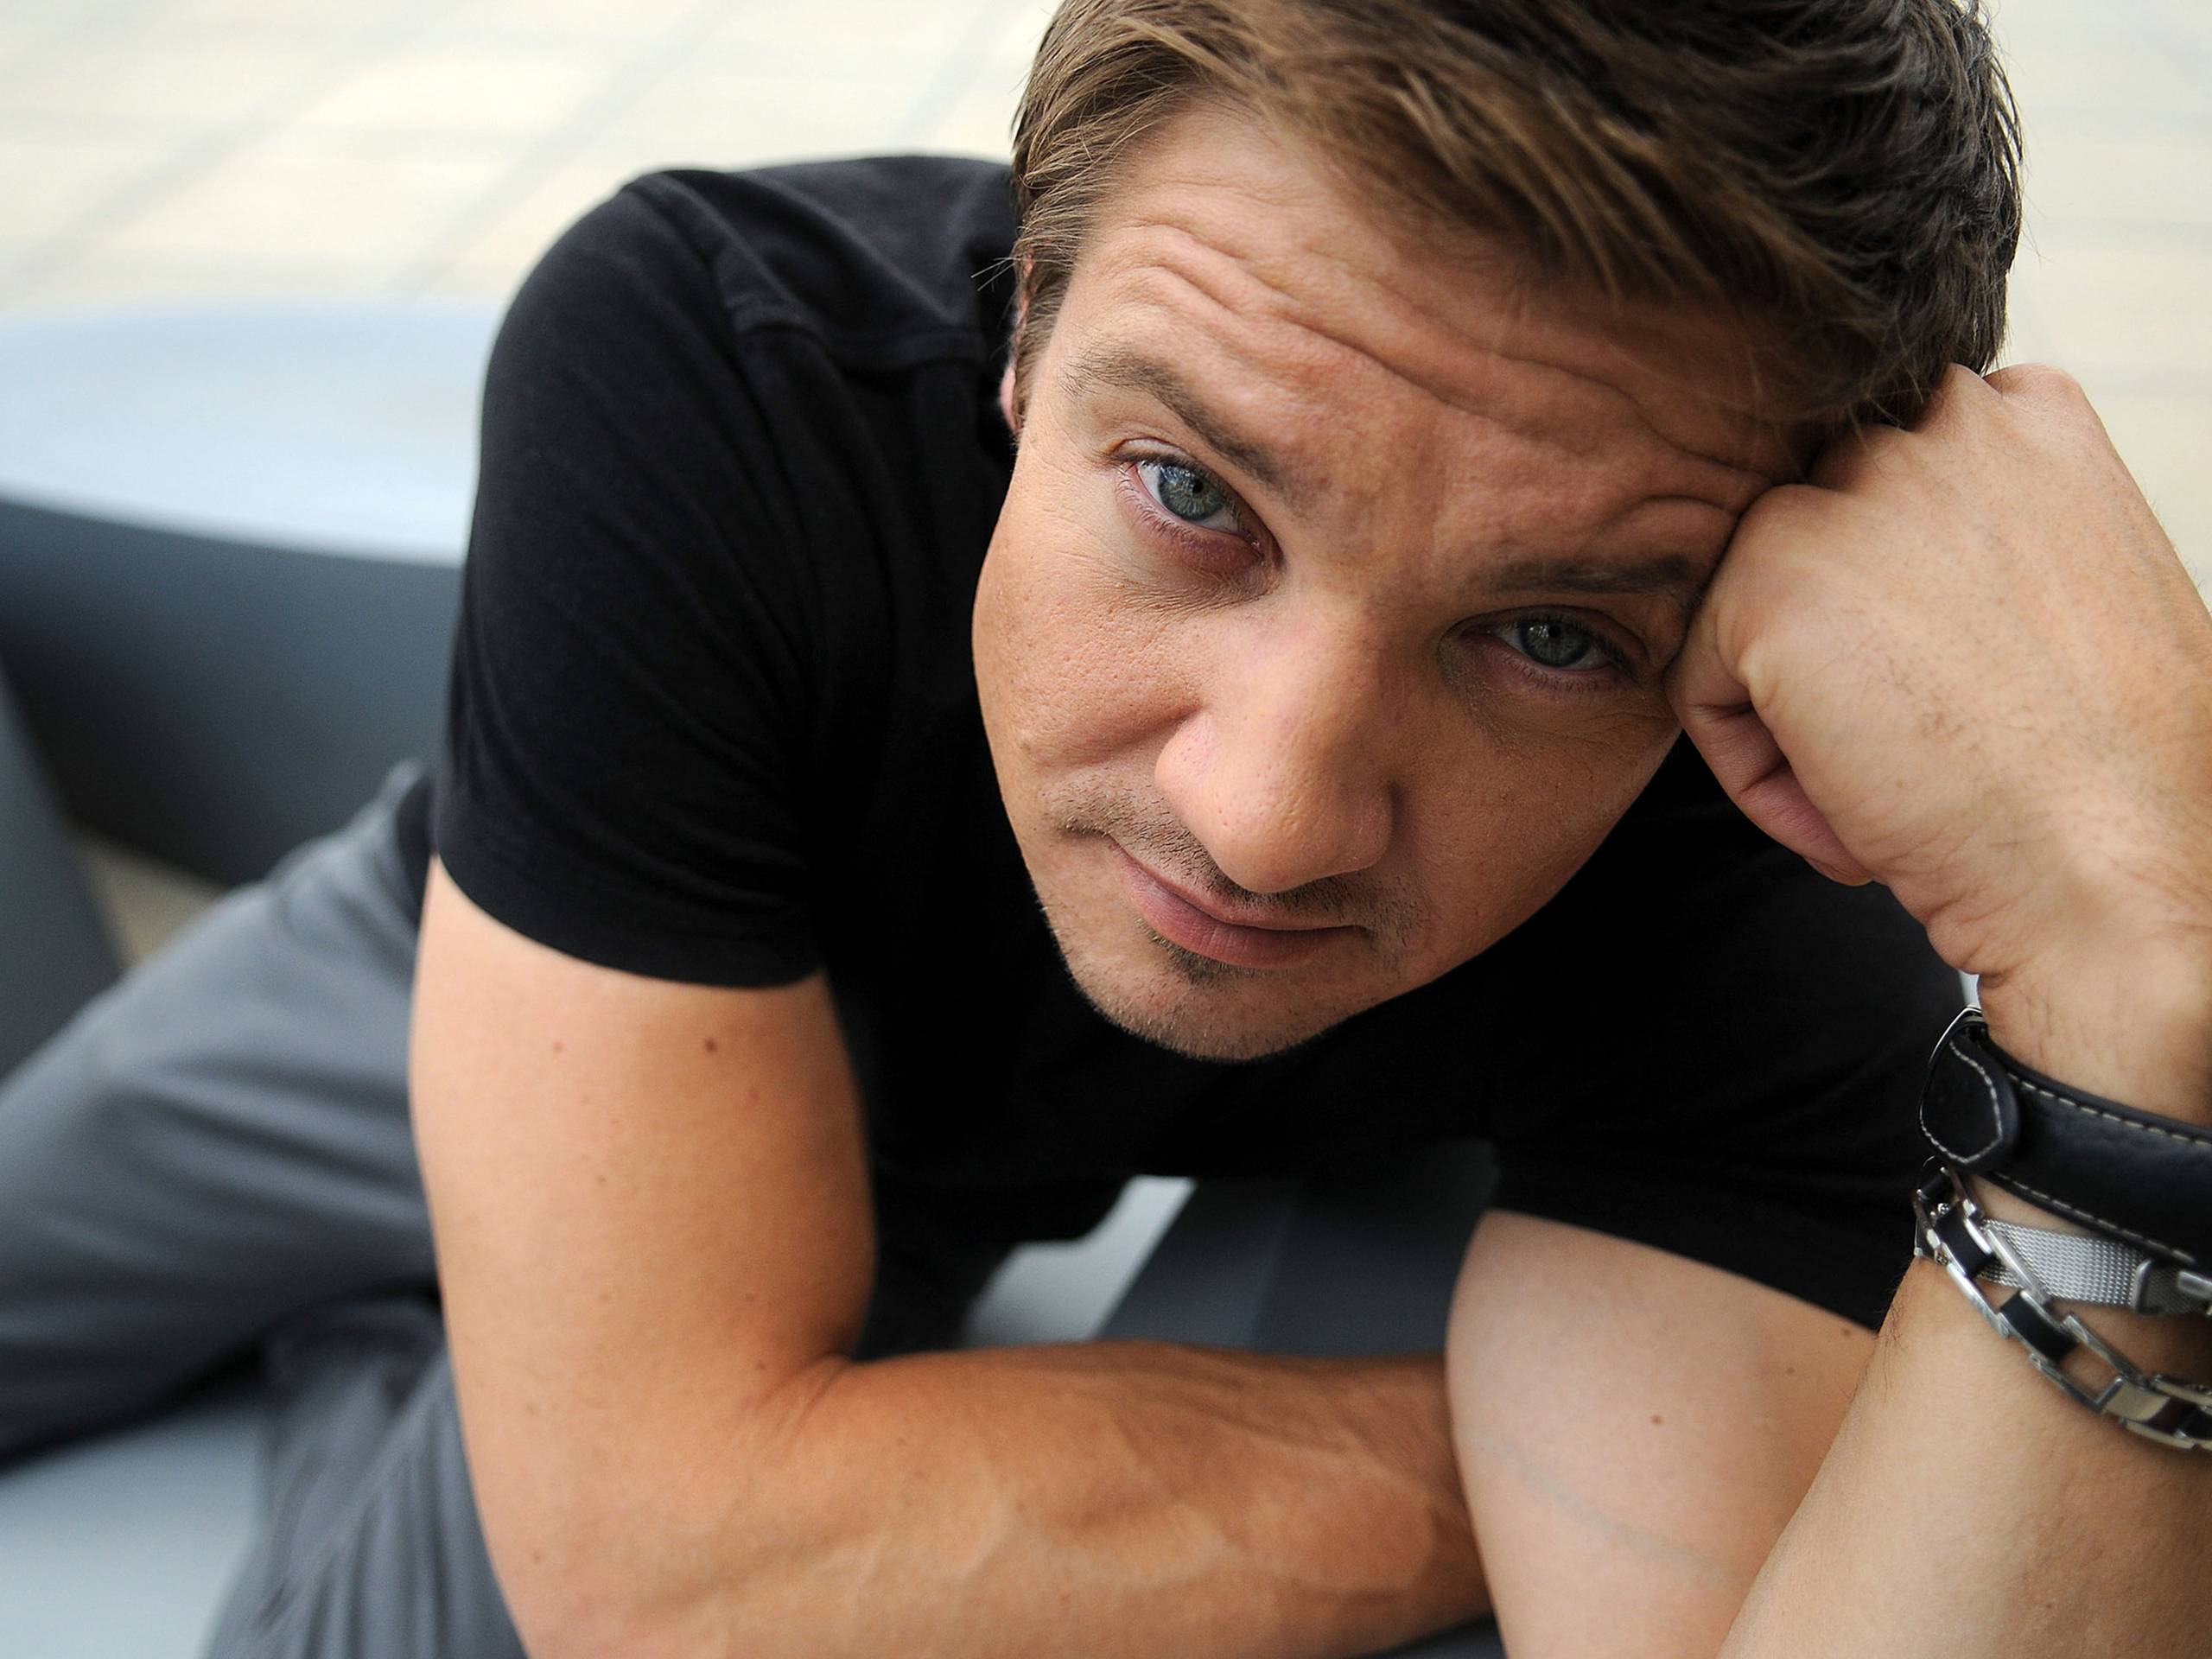 Beloved Jeremy Renner wallpaper and image, picture